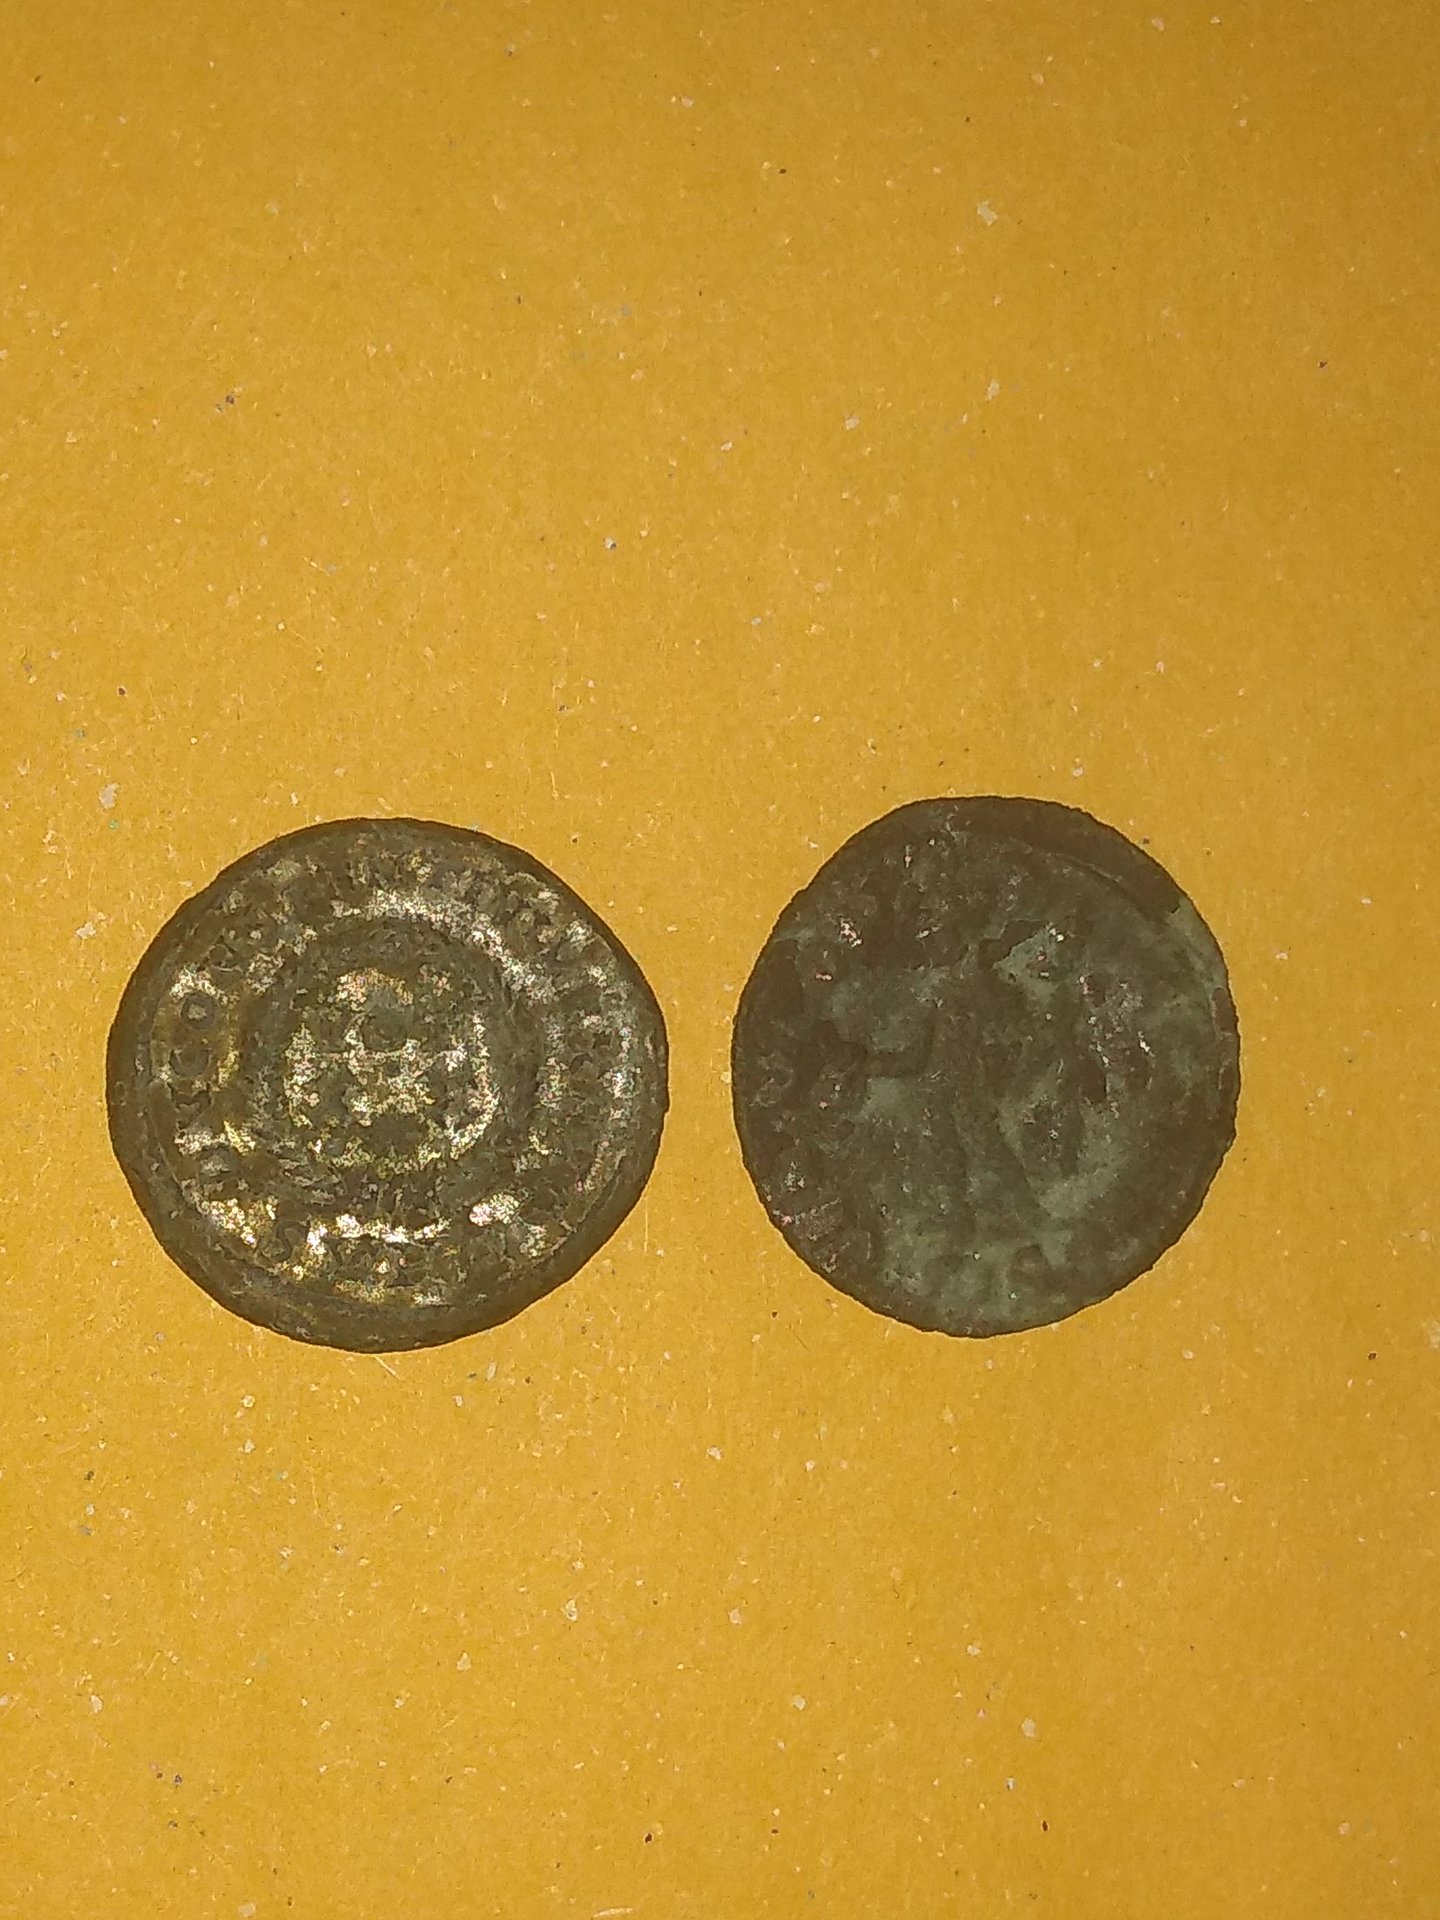 What is my best tool to go about cleaning this $3 Balkan coin from Noble  Roman Coins? It seems to hold a fair amount of detail and I don't want to  mess